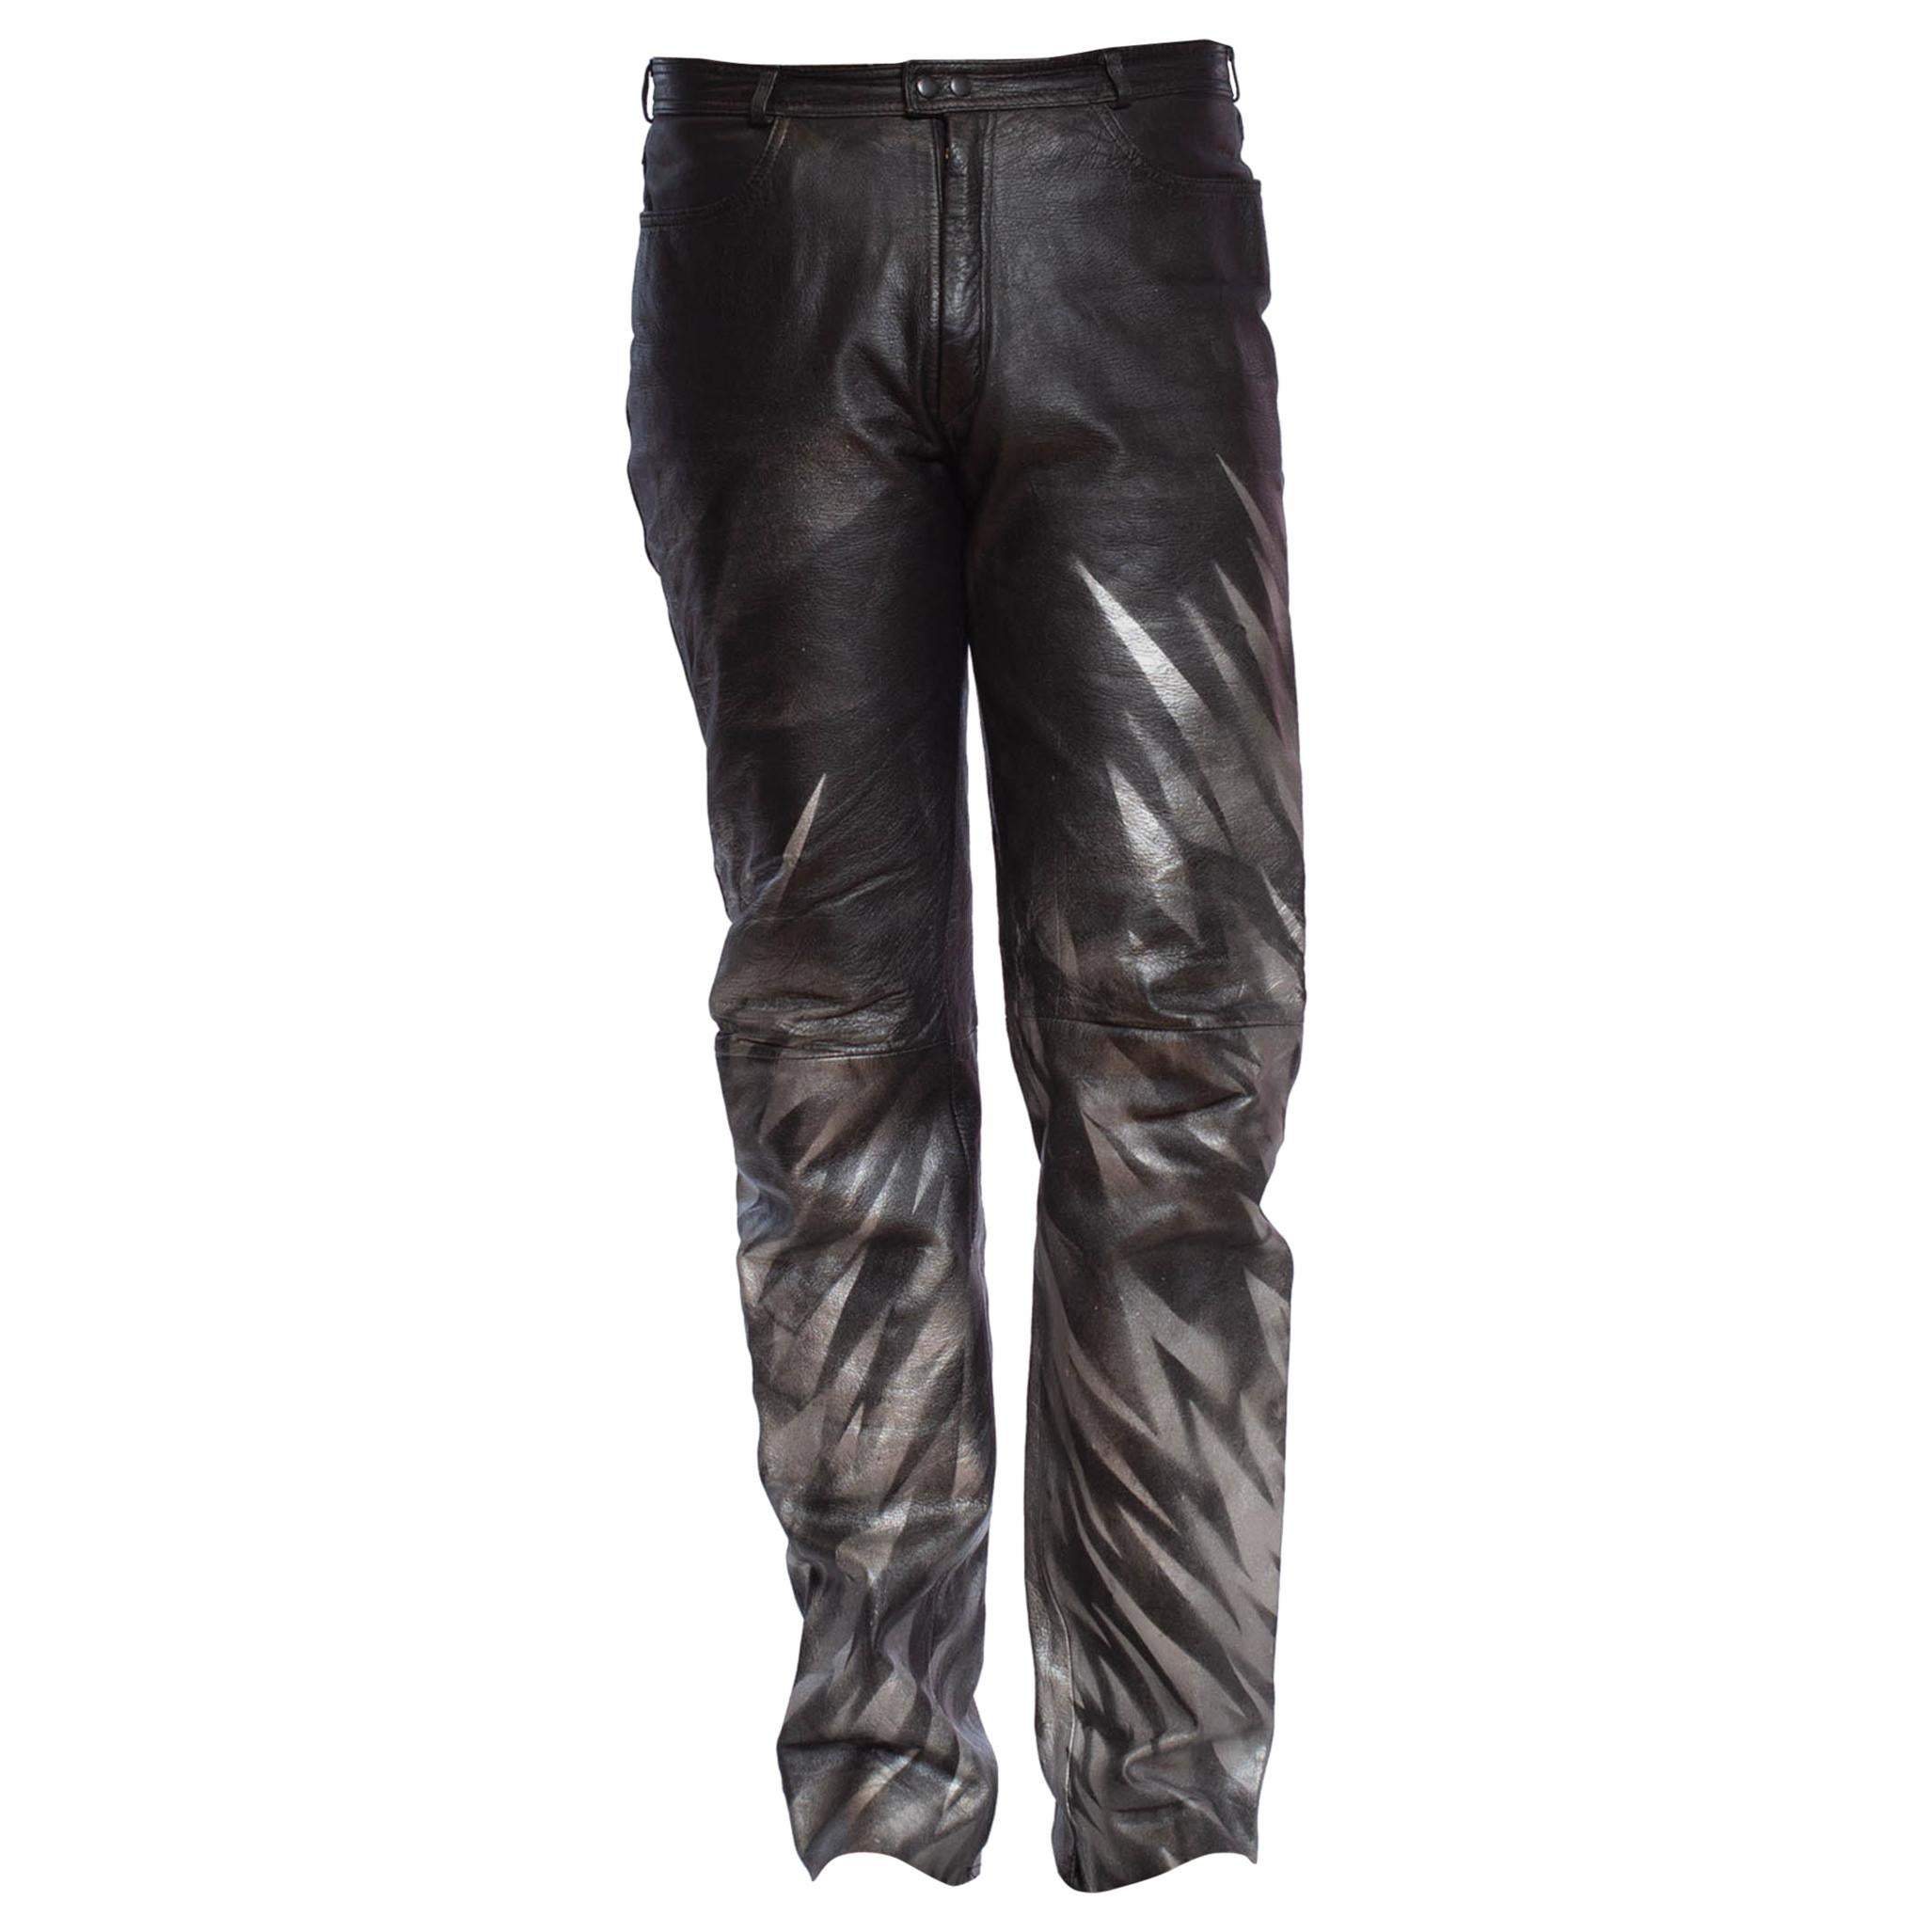 1980S Black Leather Men's Pants With Silver Metallic Graffiti For Sale